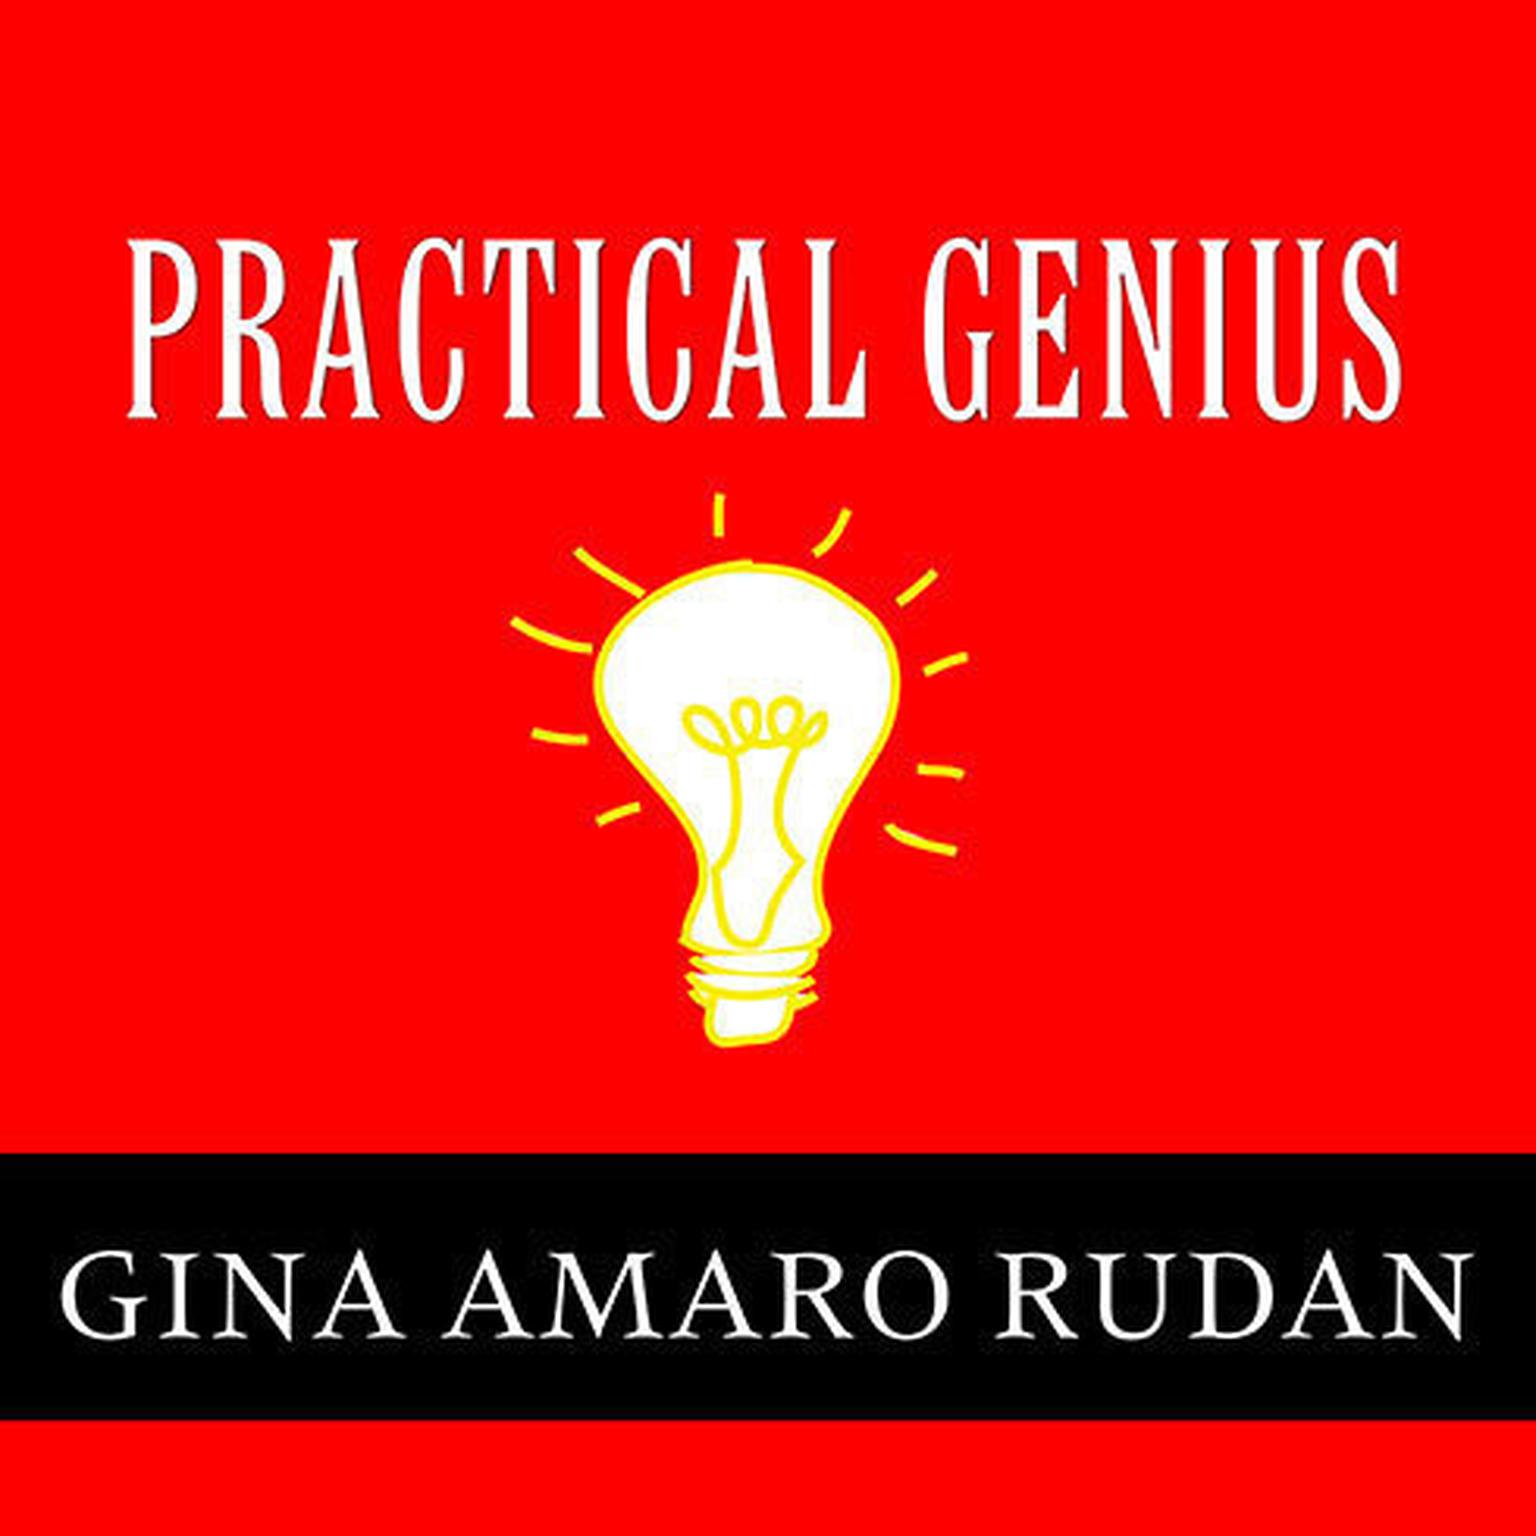 Practical Genius: The Real Smarts You Need to Get Your Talents and Passions Working for You Audiobook, by Gina Amaro Rudan